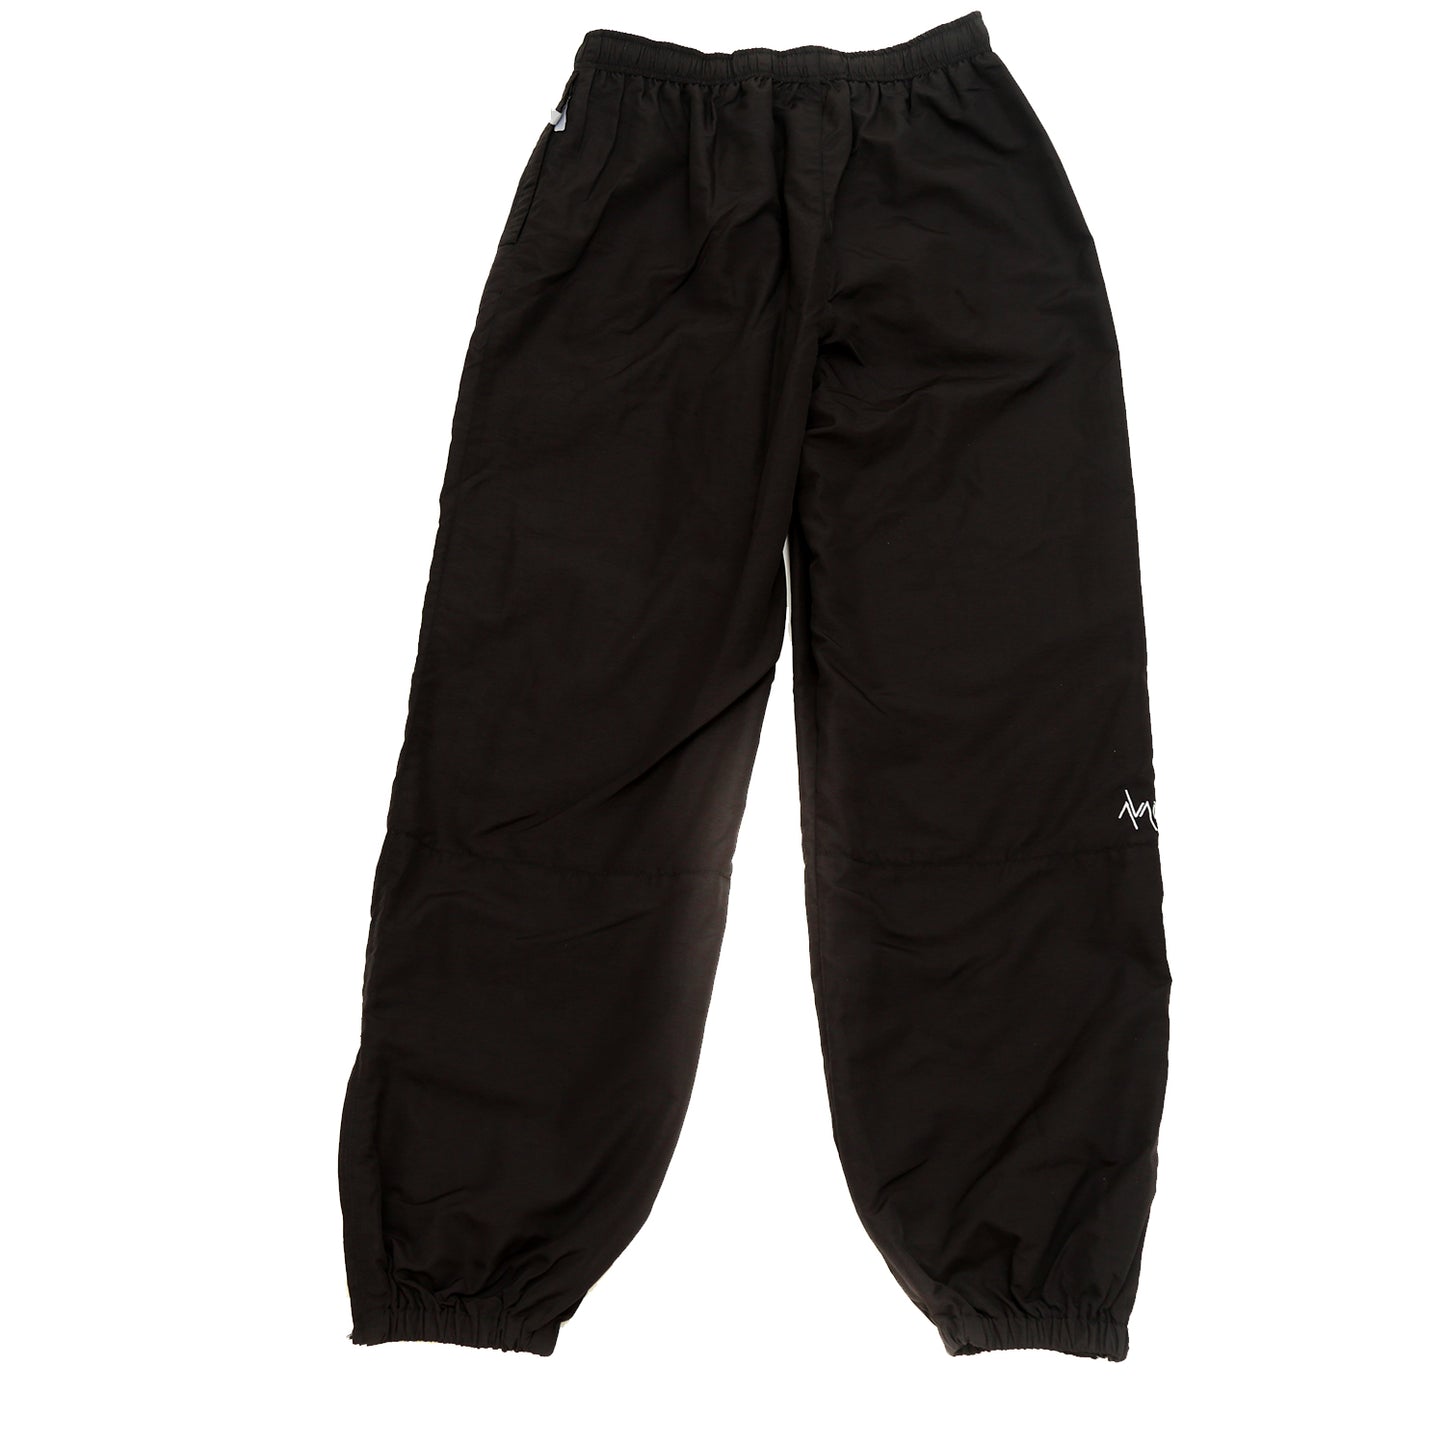 BASECAMP WOVEN TRACK PANT IN BLACK AND WHITE